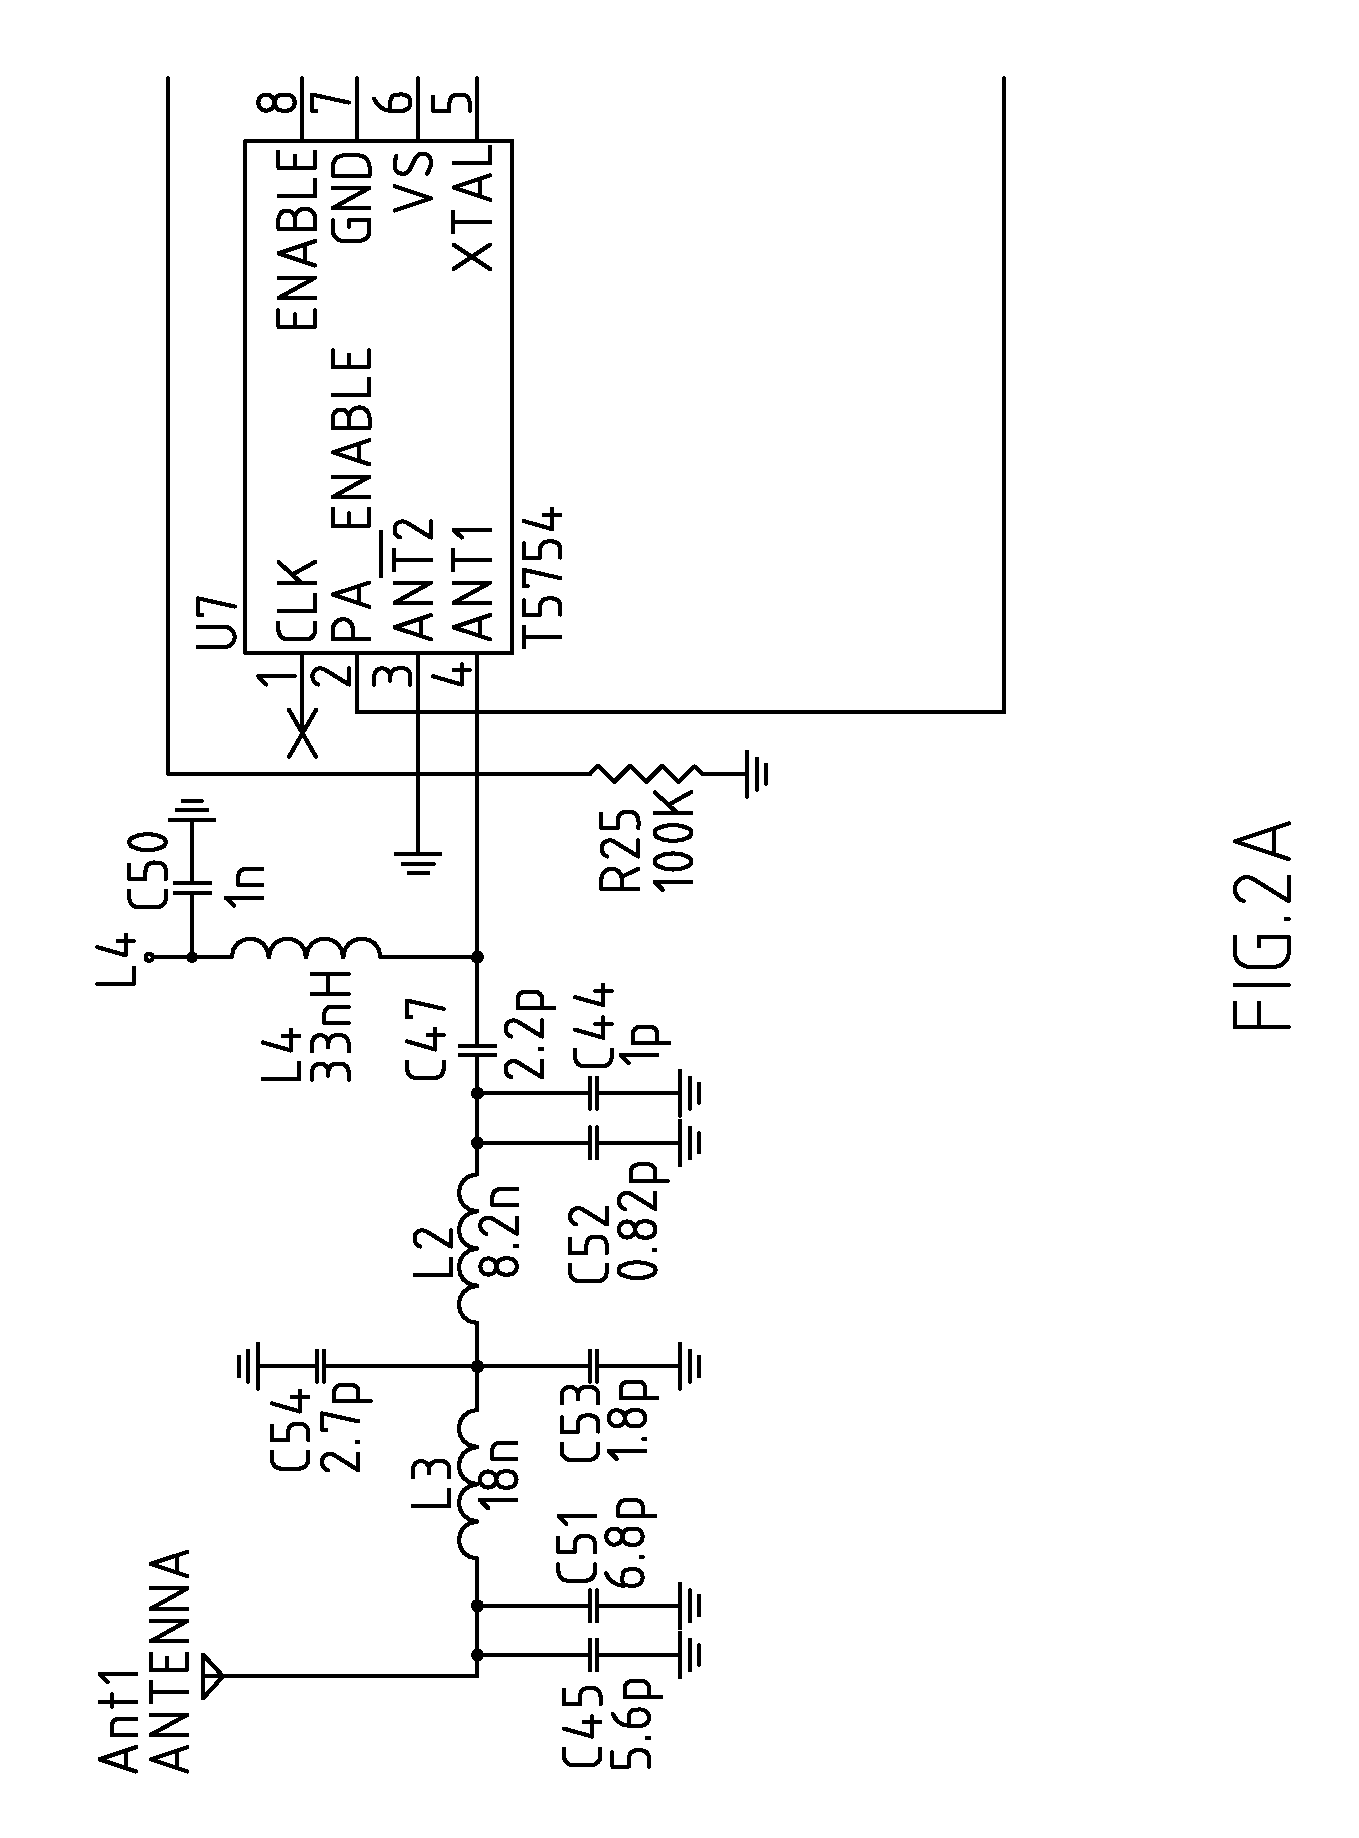 Wireless tire pressure and temperature detecting system